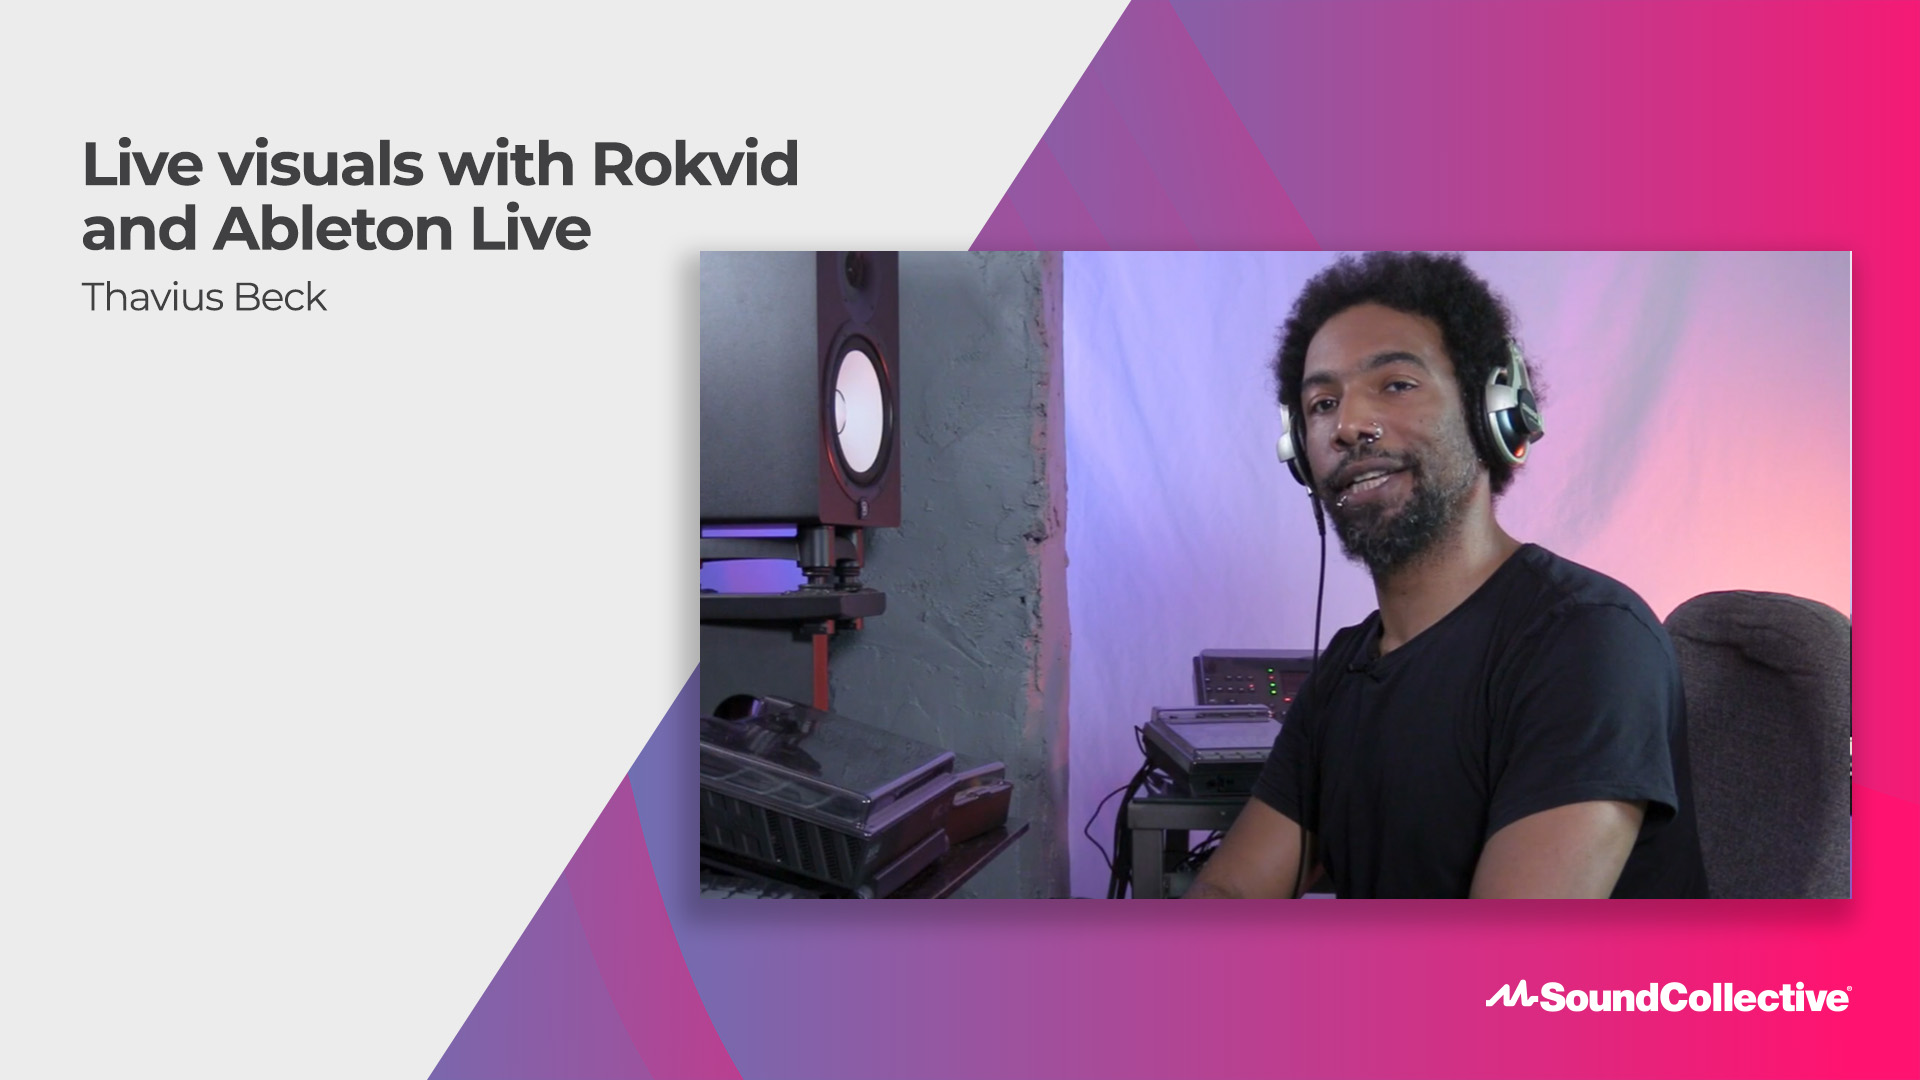 Live visuals with Rokvid and Ableton Live